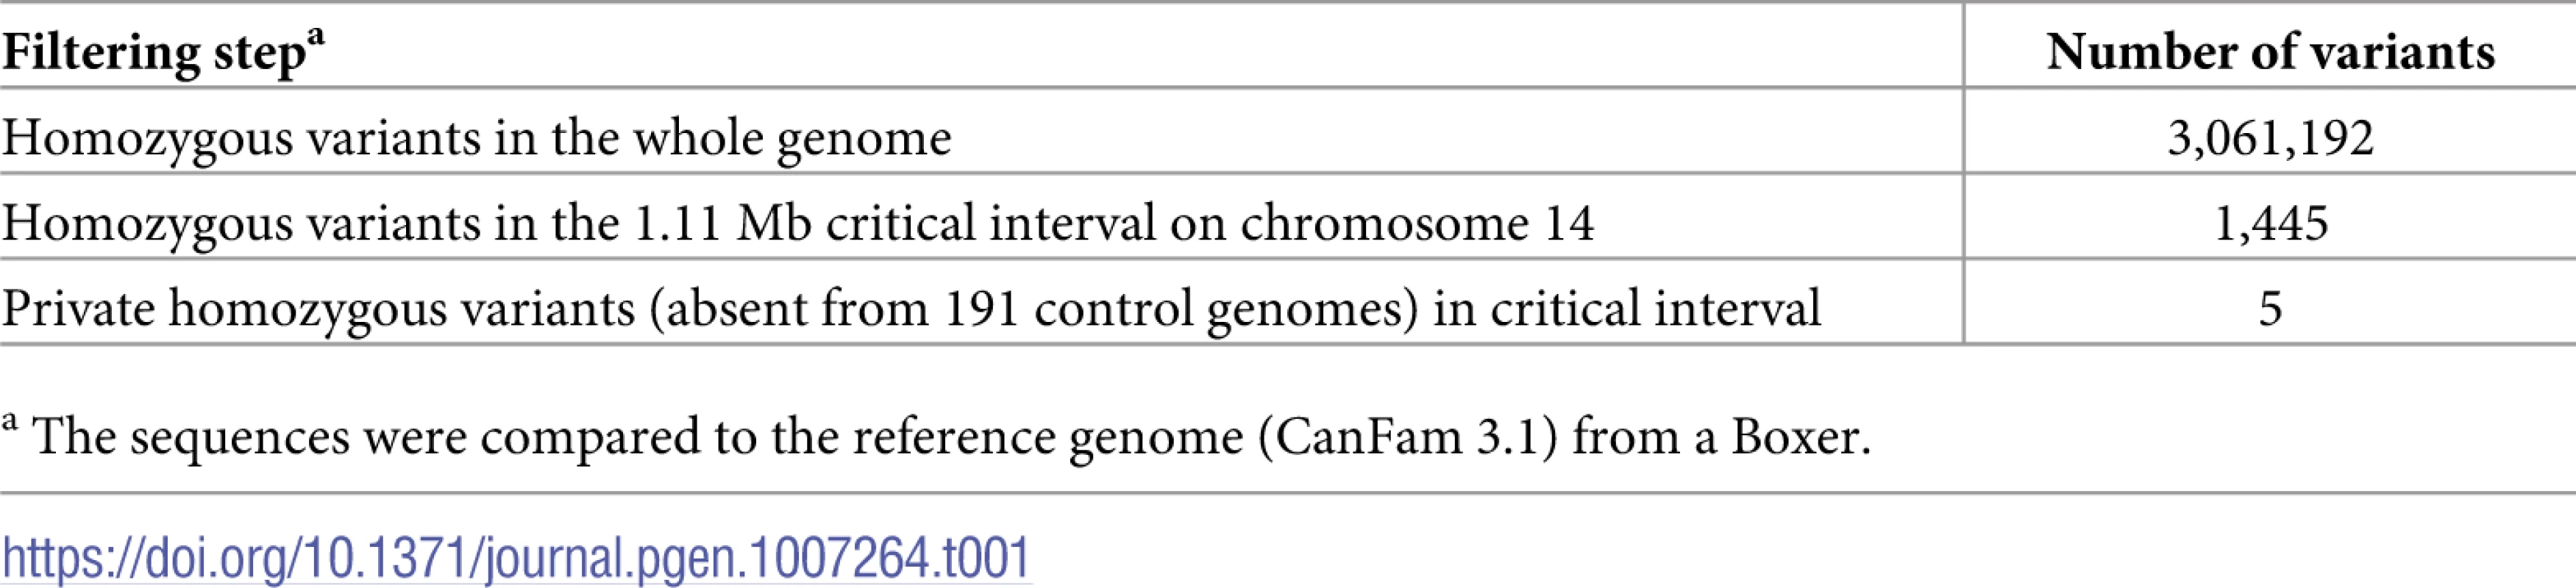 Variants detected by whole genome re-sequencing of an LAD affected dog.